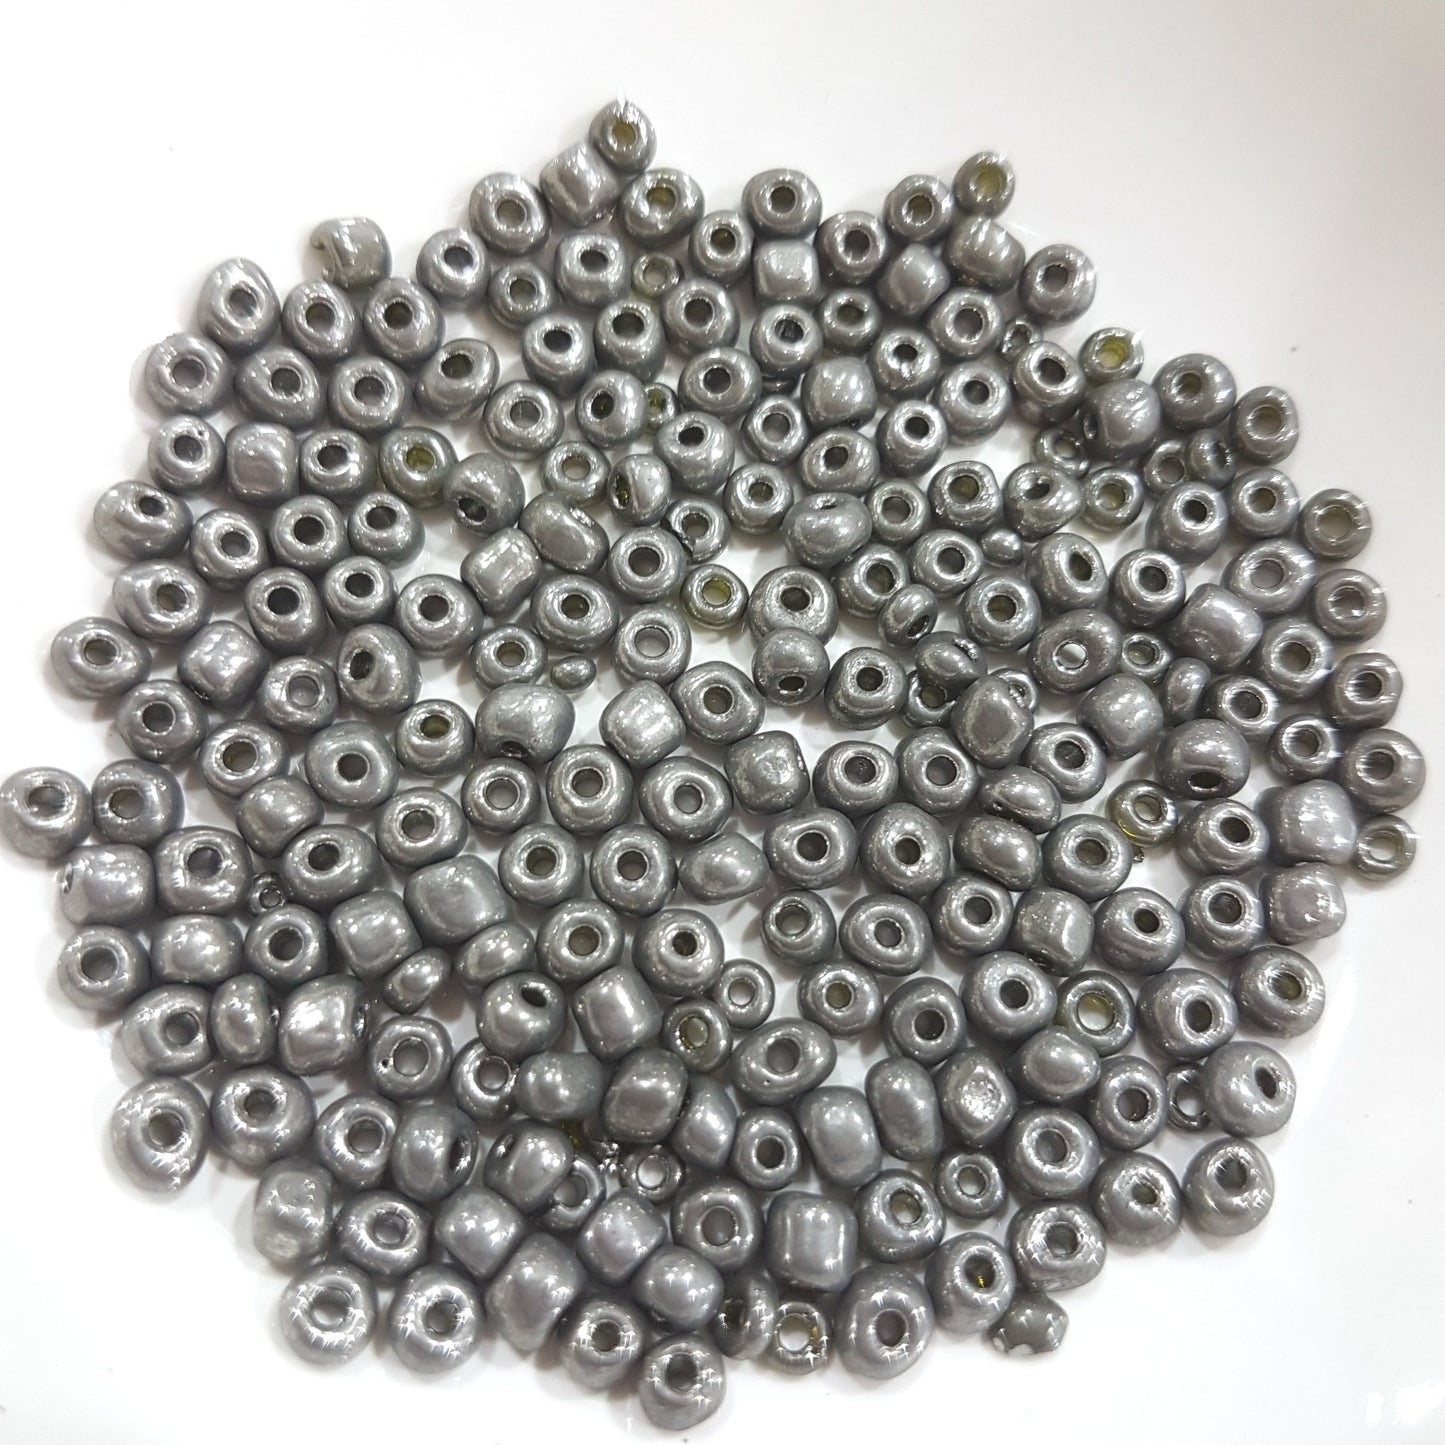 15g 6/0 Opaque Grey Seed Beads